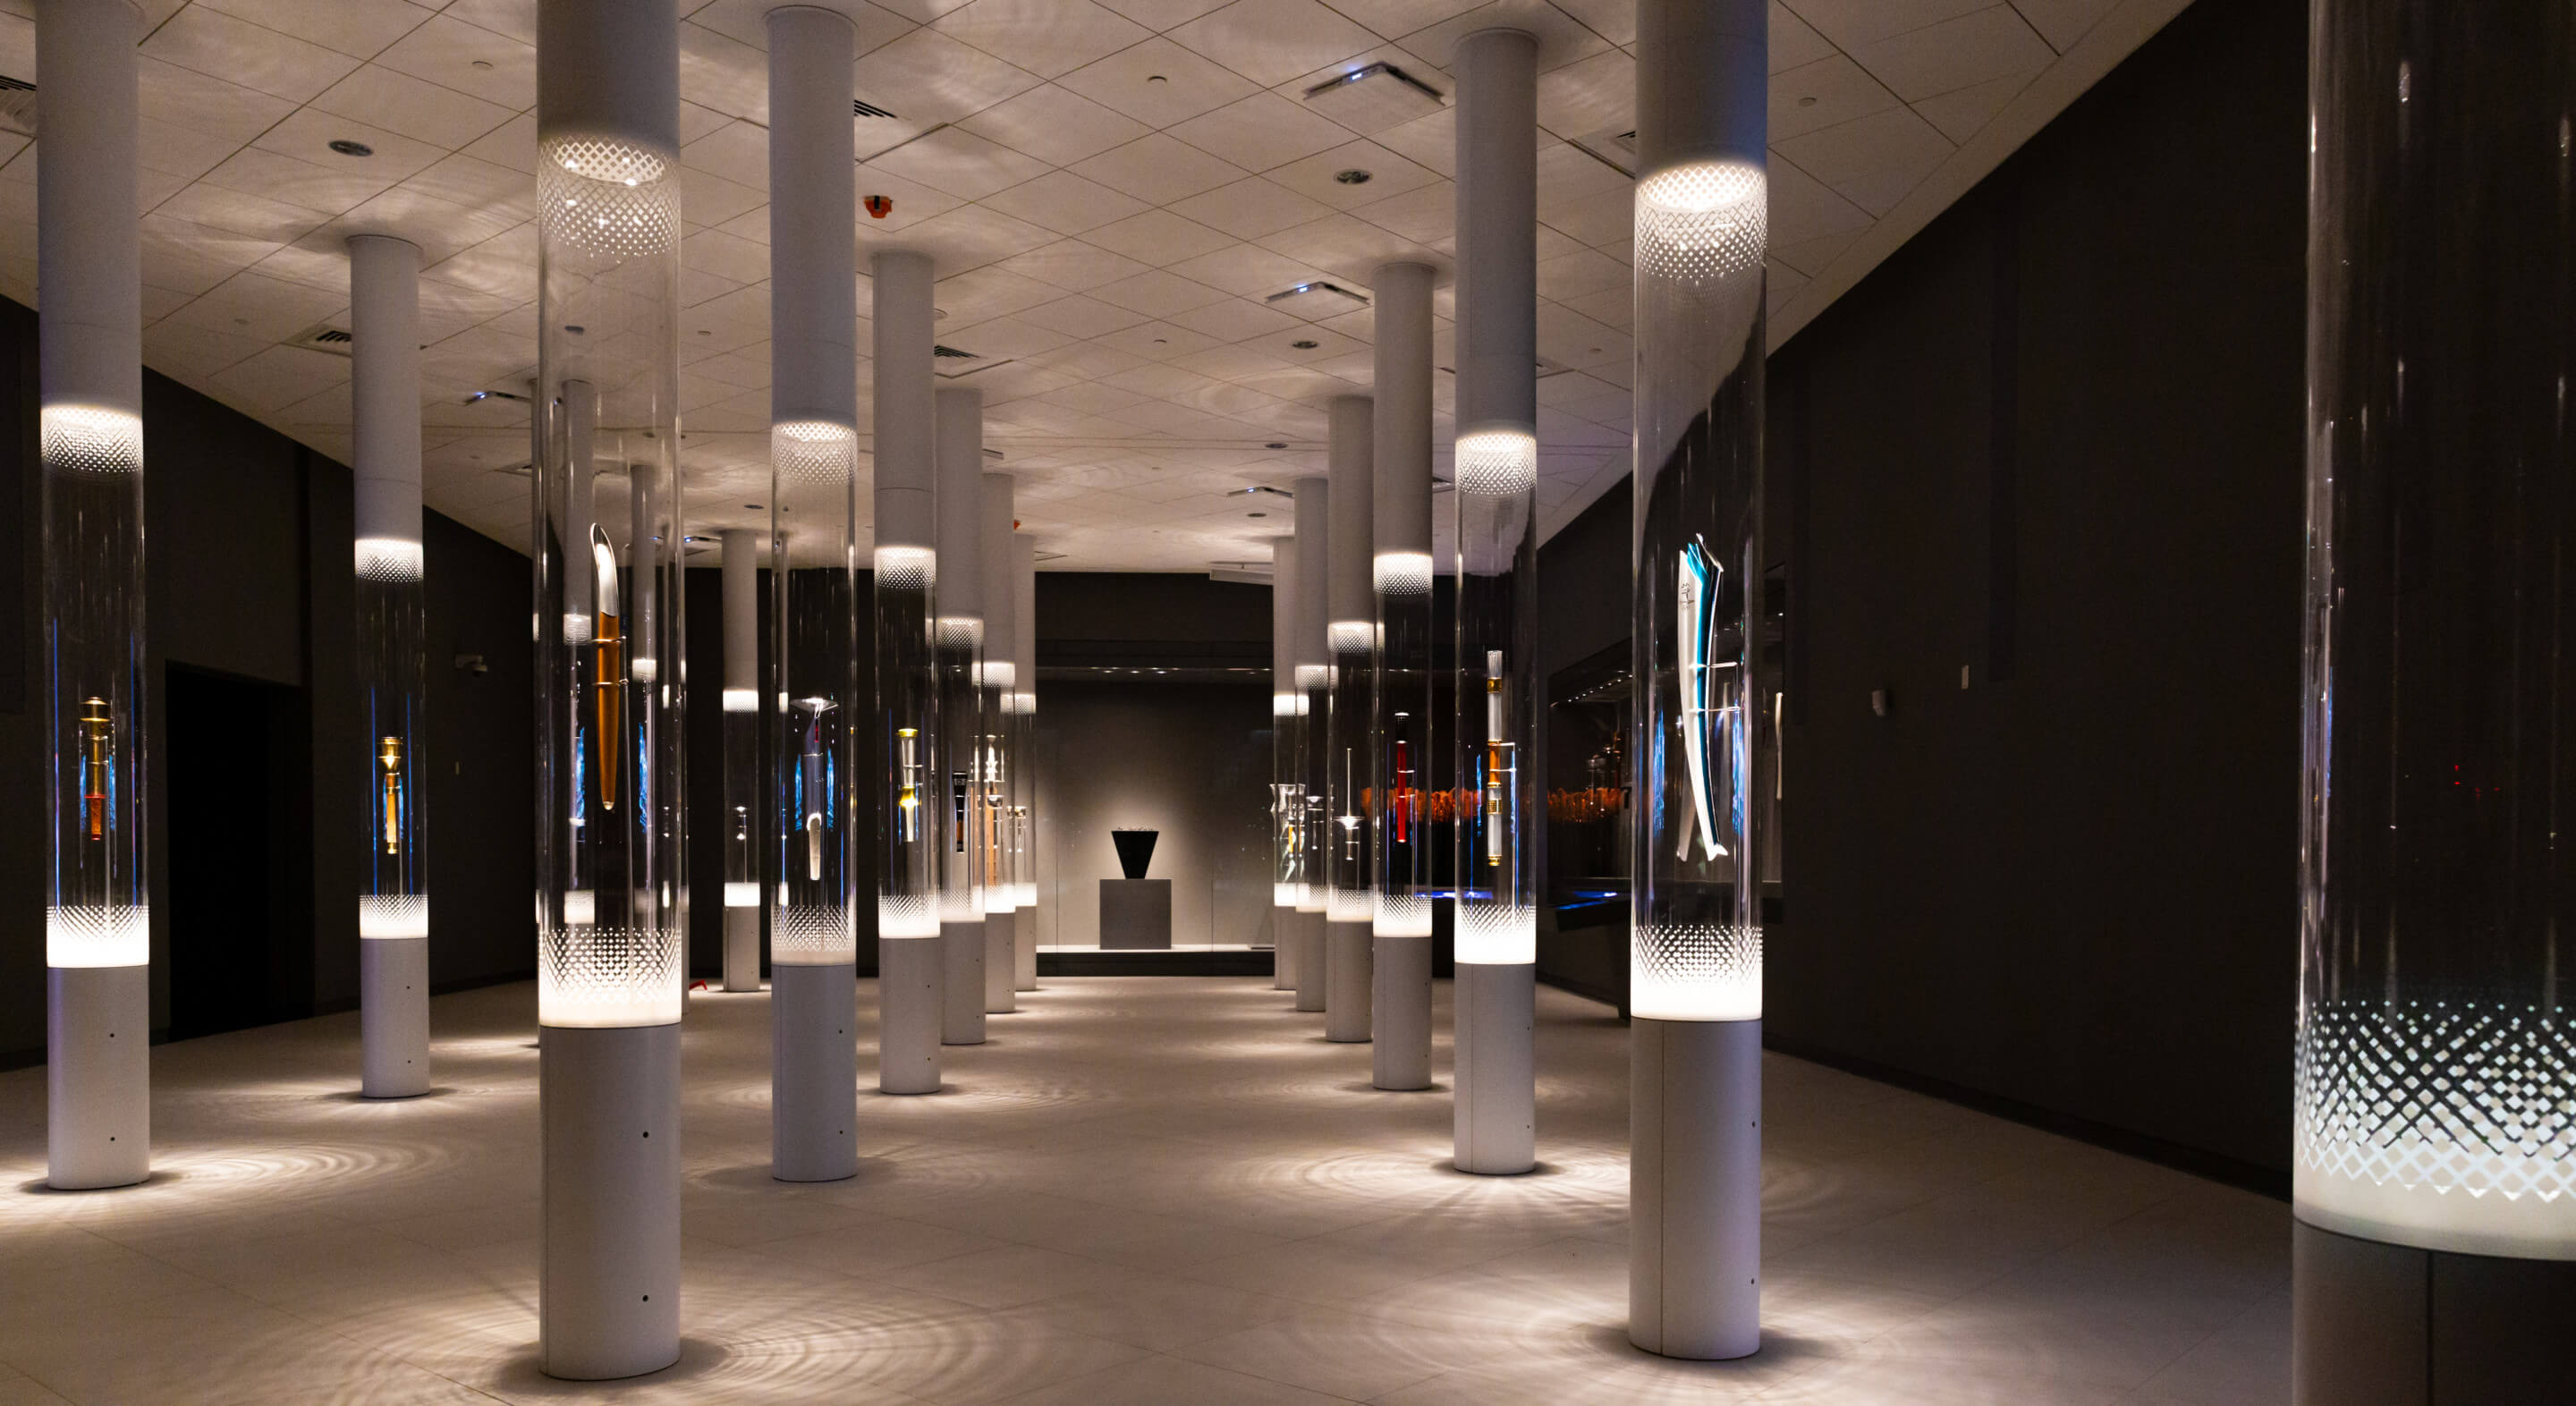 a museum exhibit featuring olympic torches in cylindrical displays